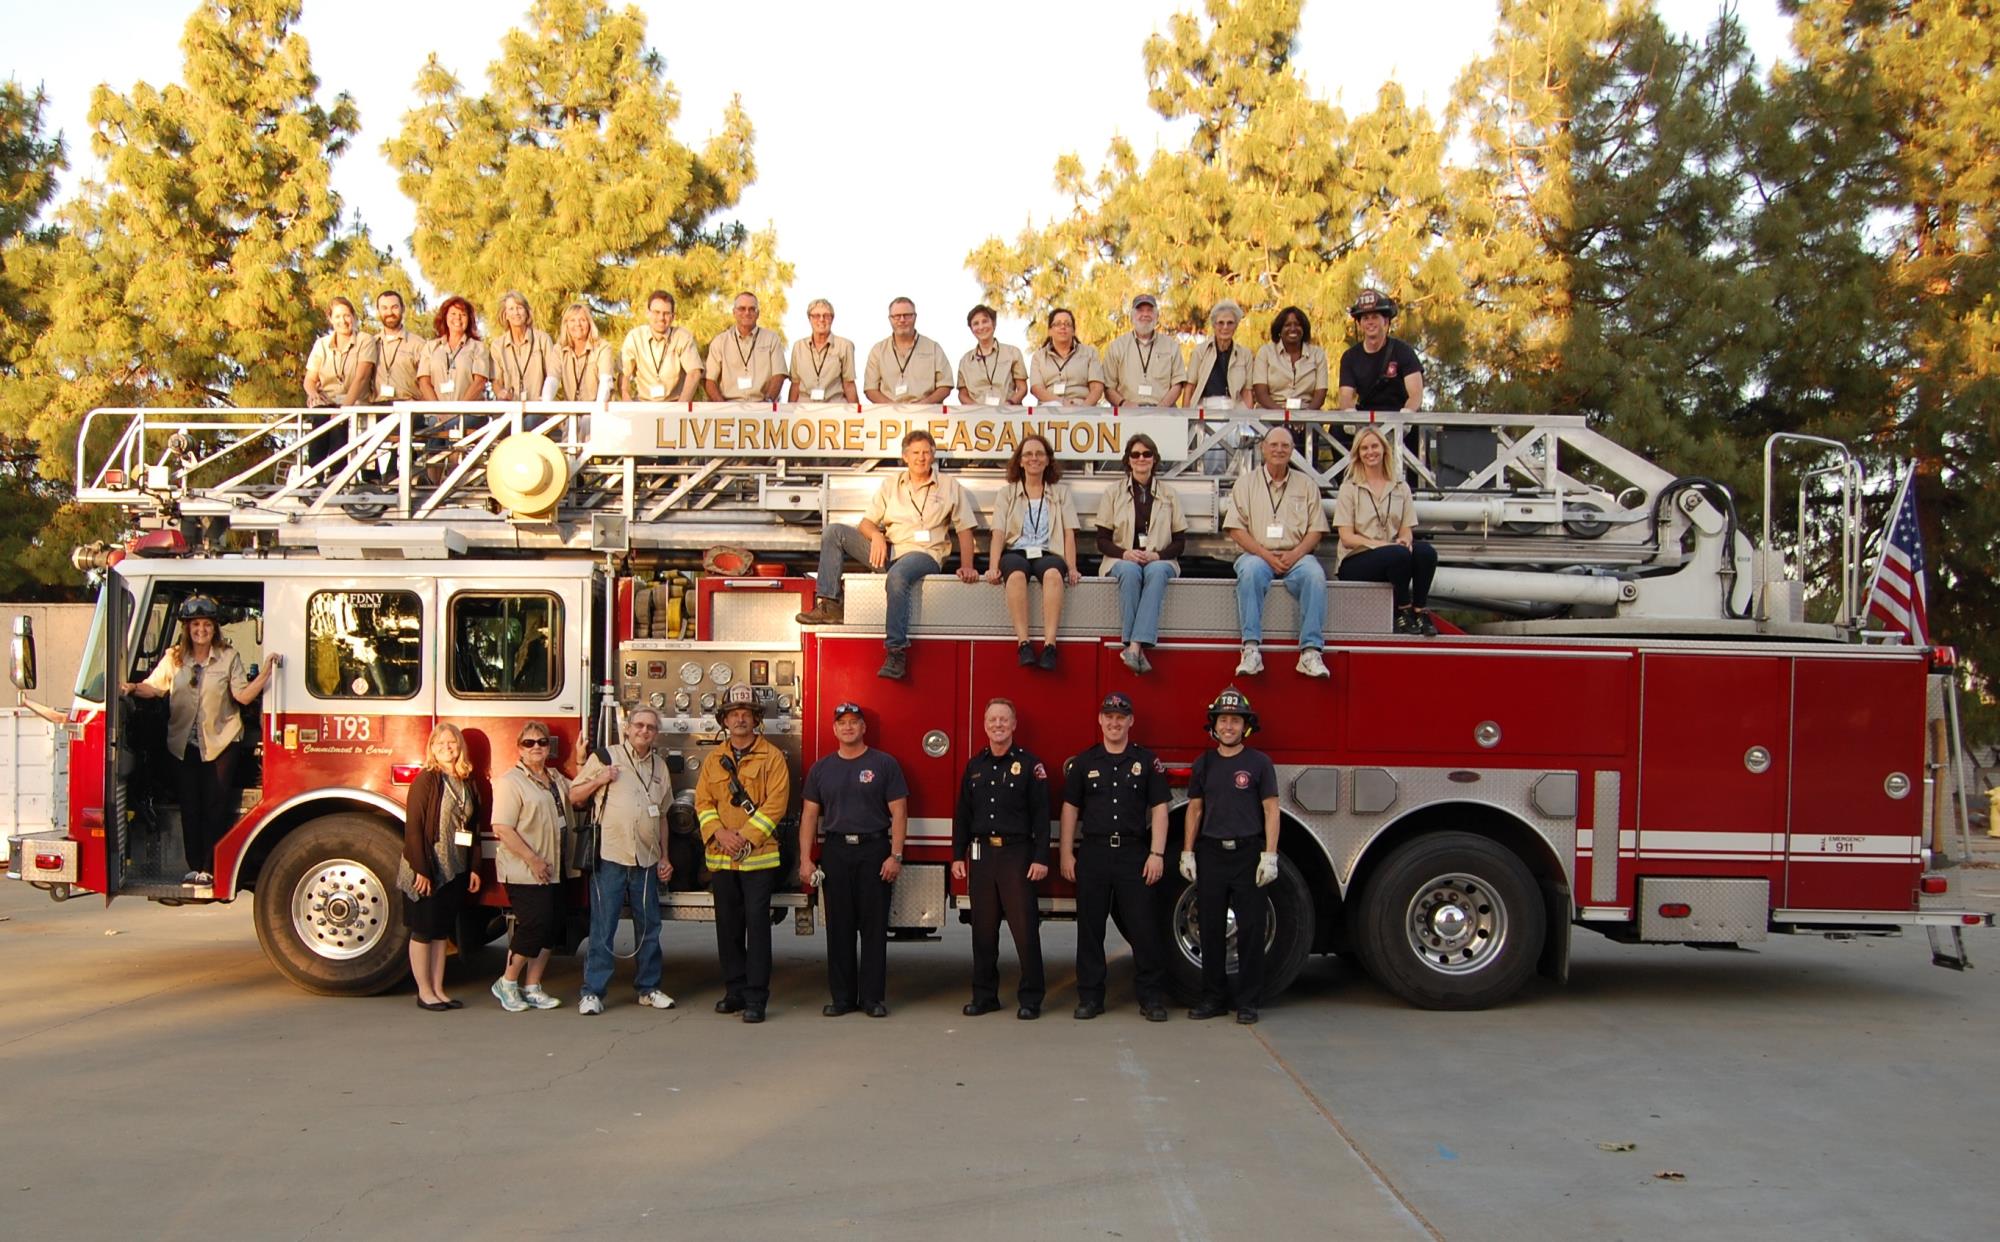 Fire Department group photo with truck